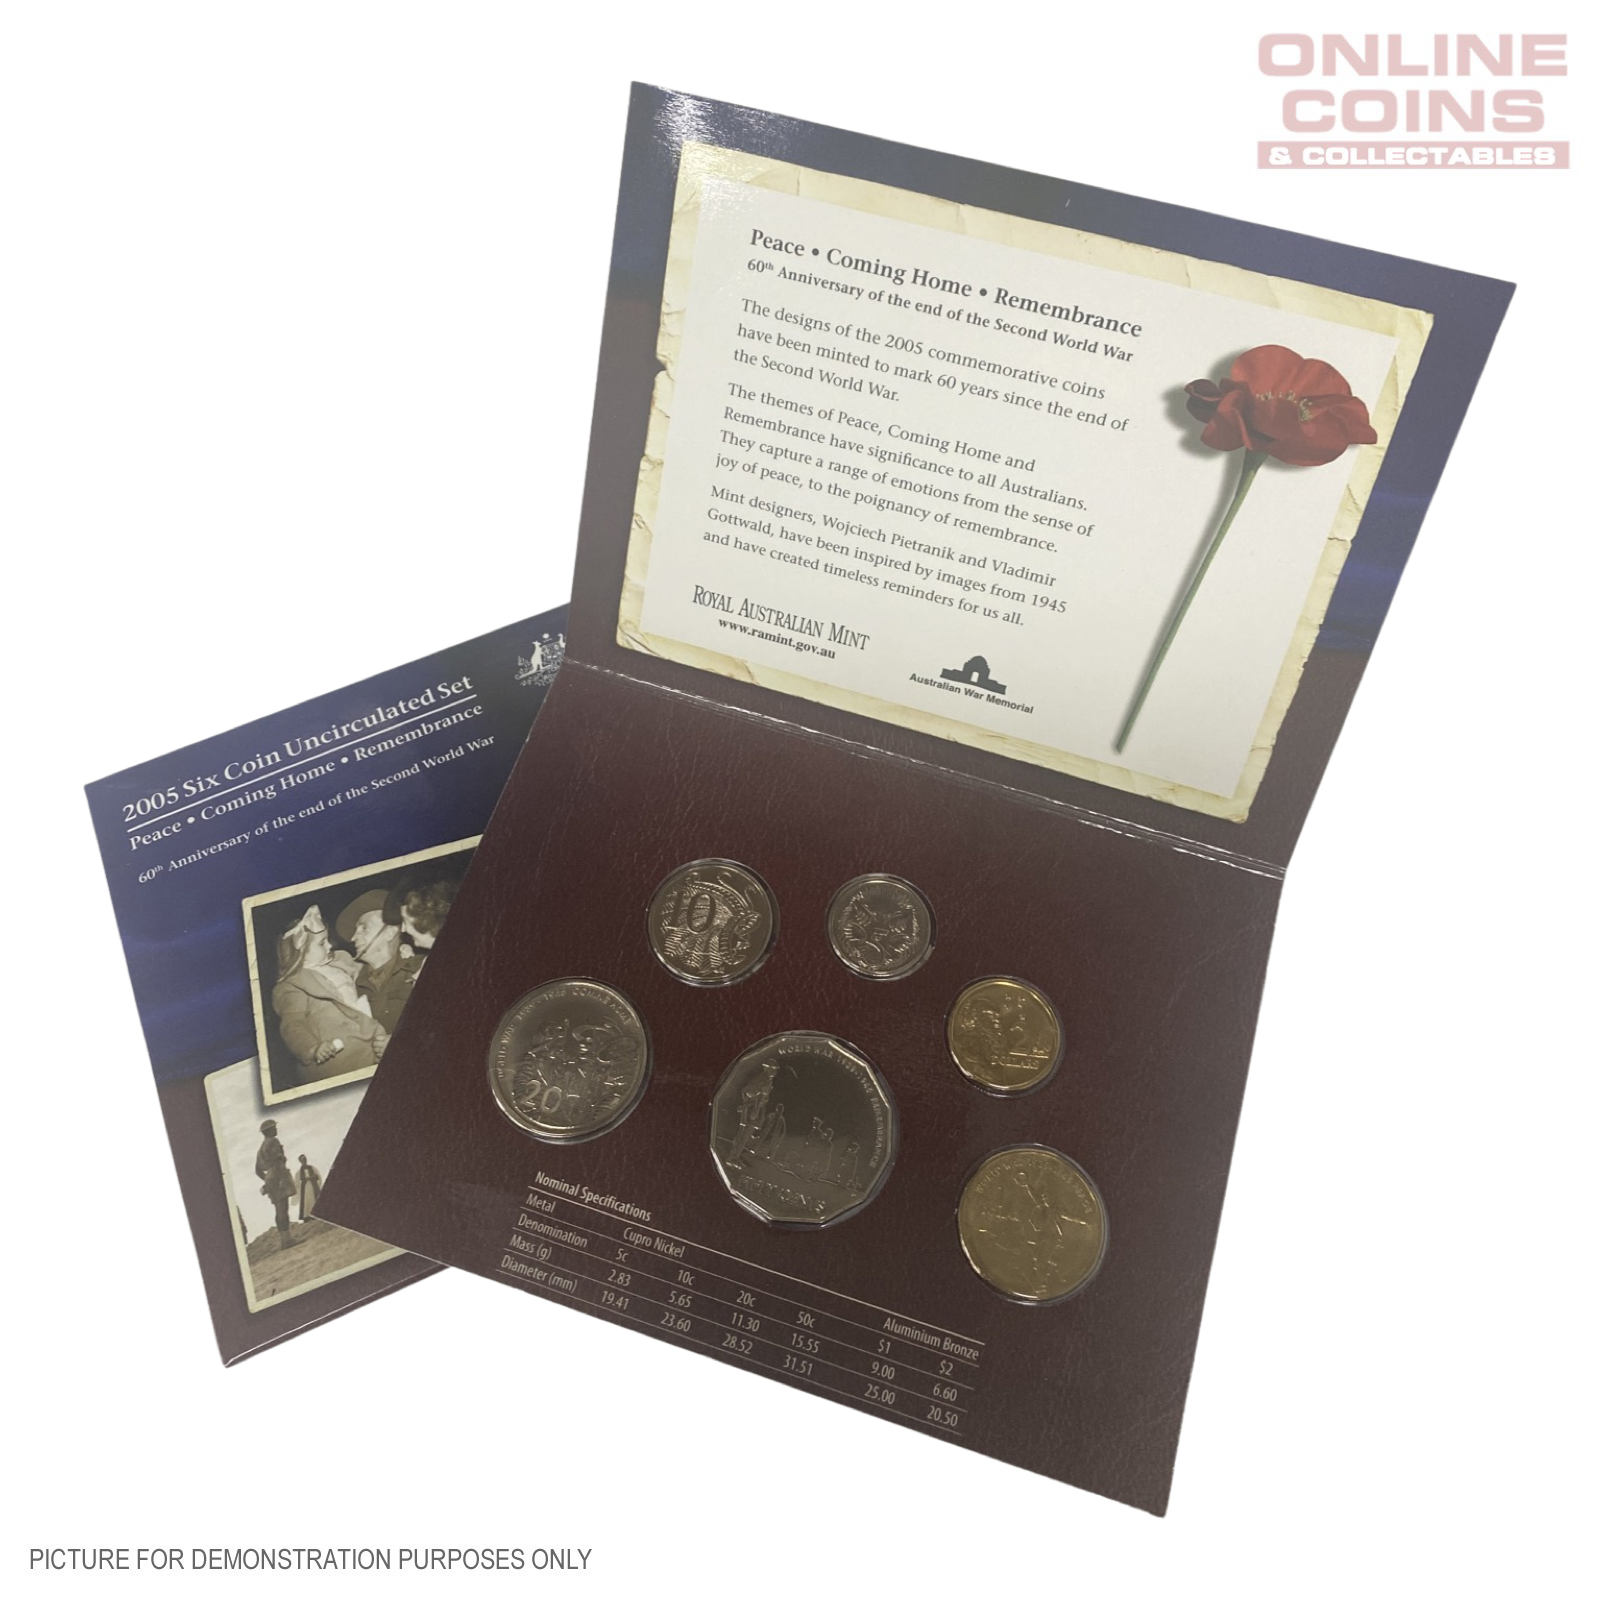 2005 Uncirculated Coin Year Set - 60th Anniversary End of WWII